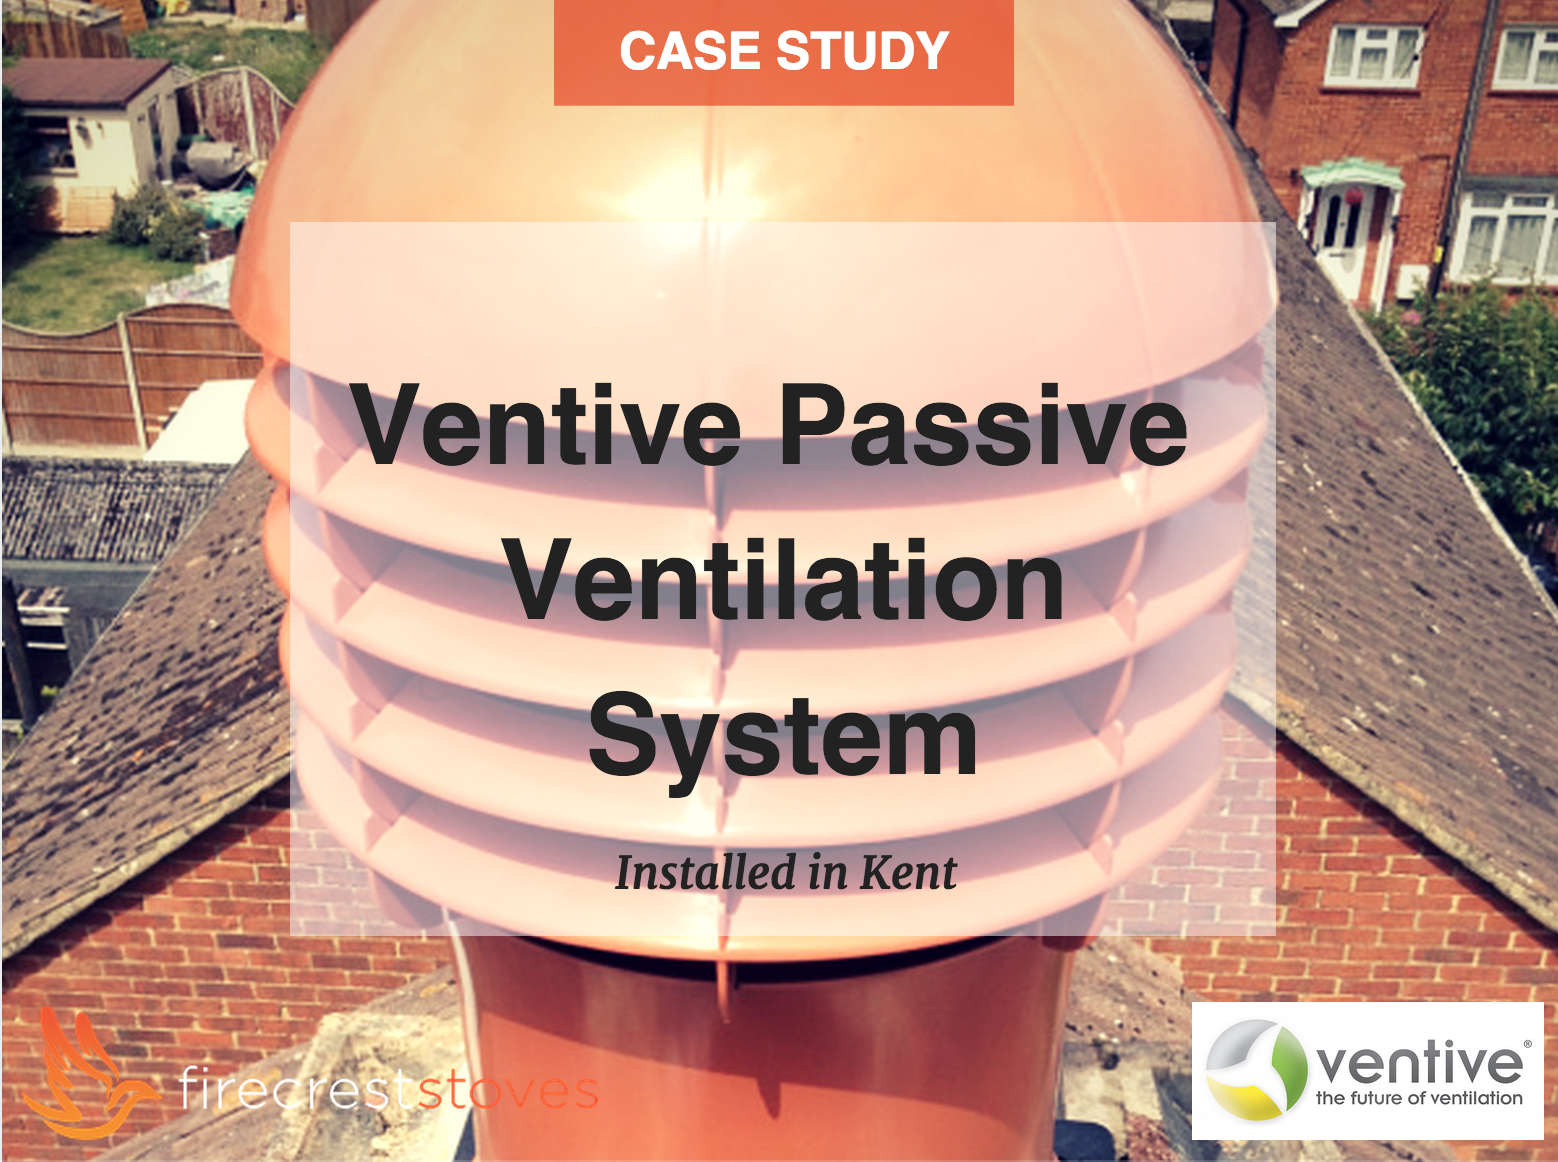 Ventive installer kent - case study and photos feature image